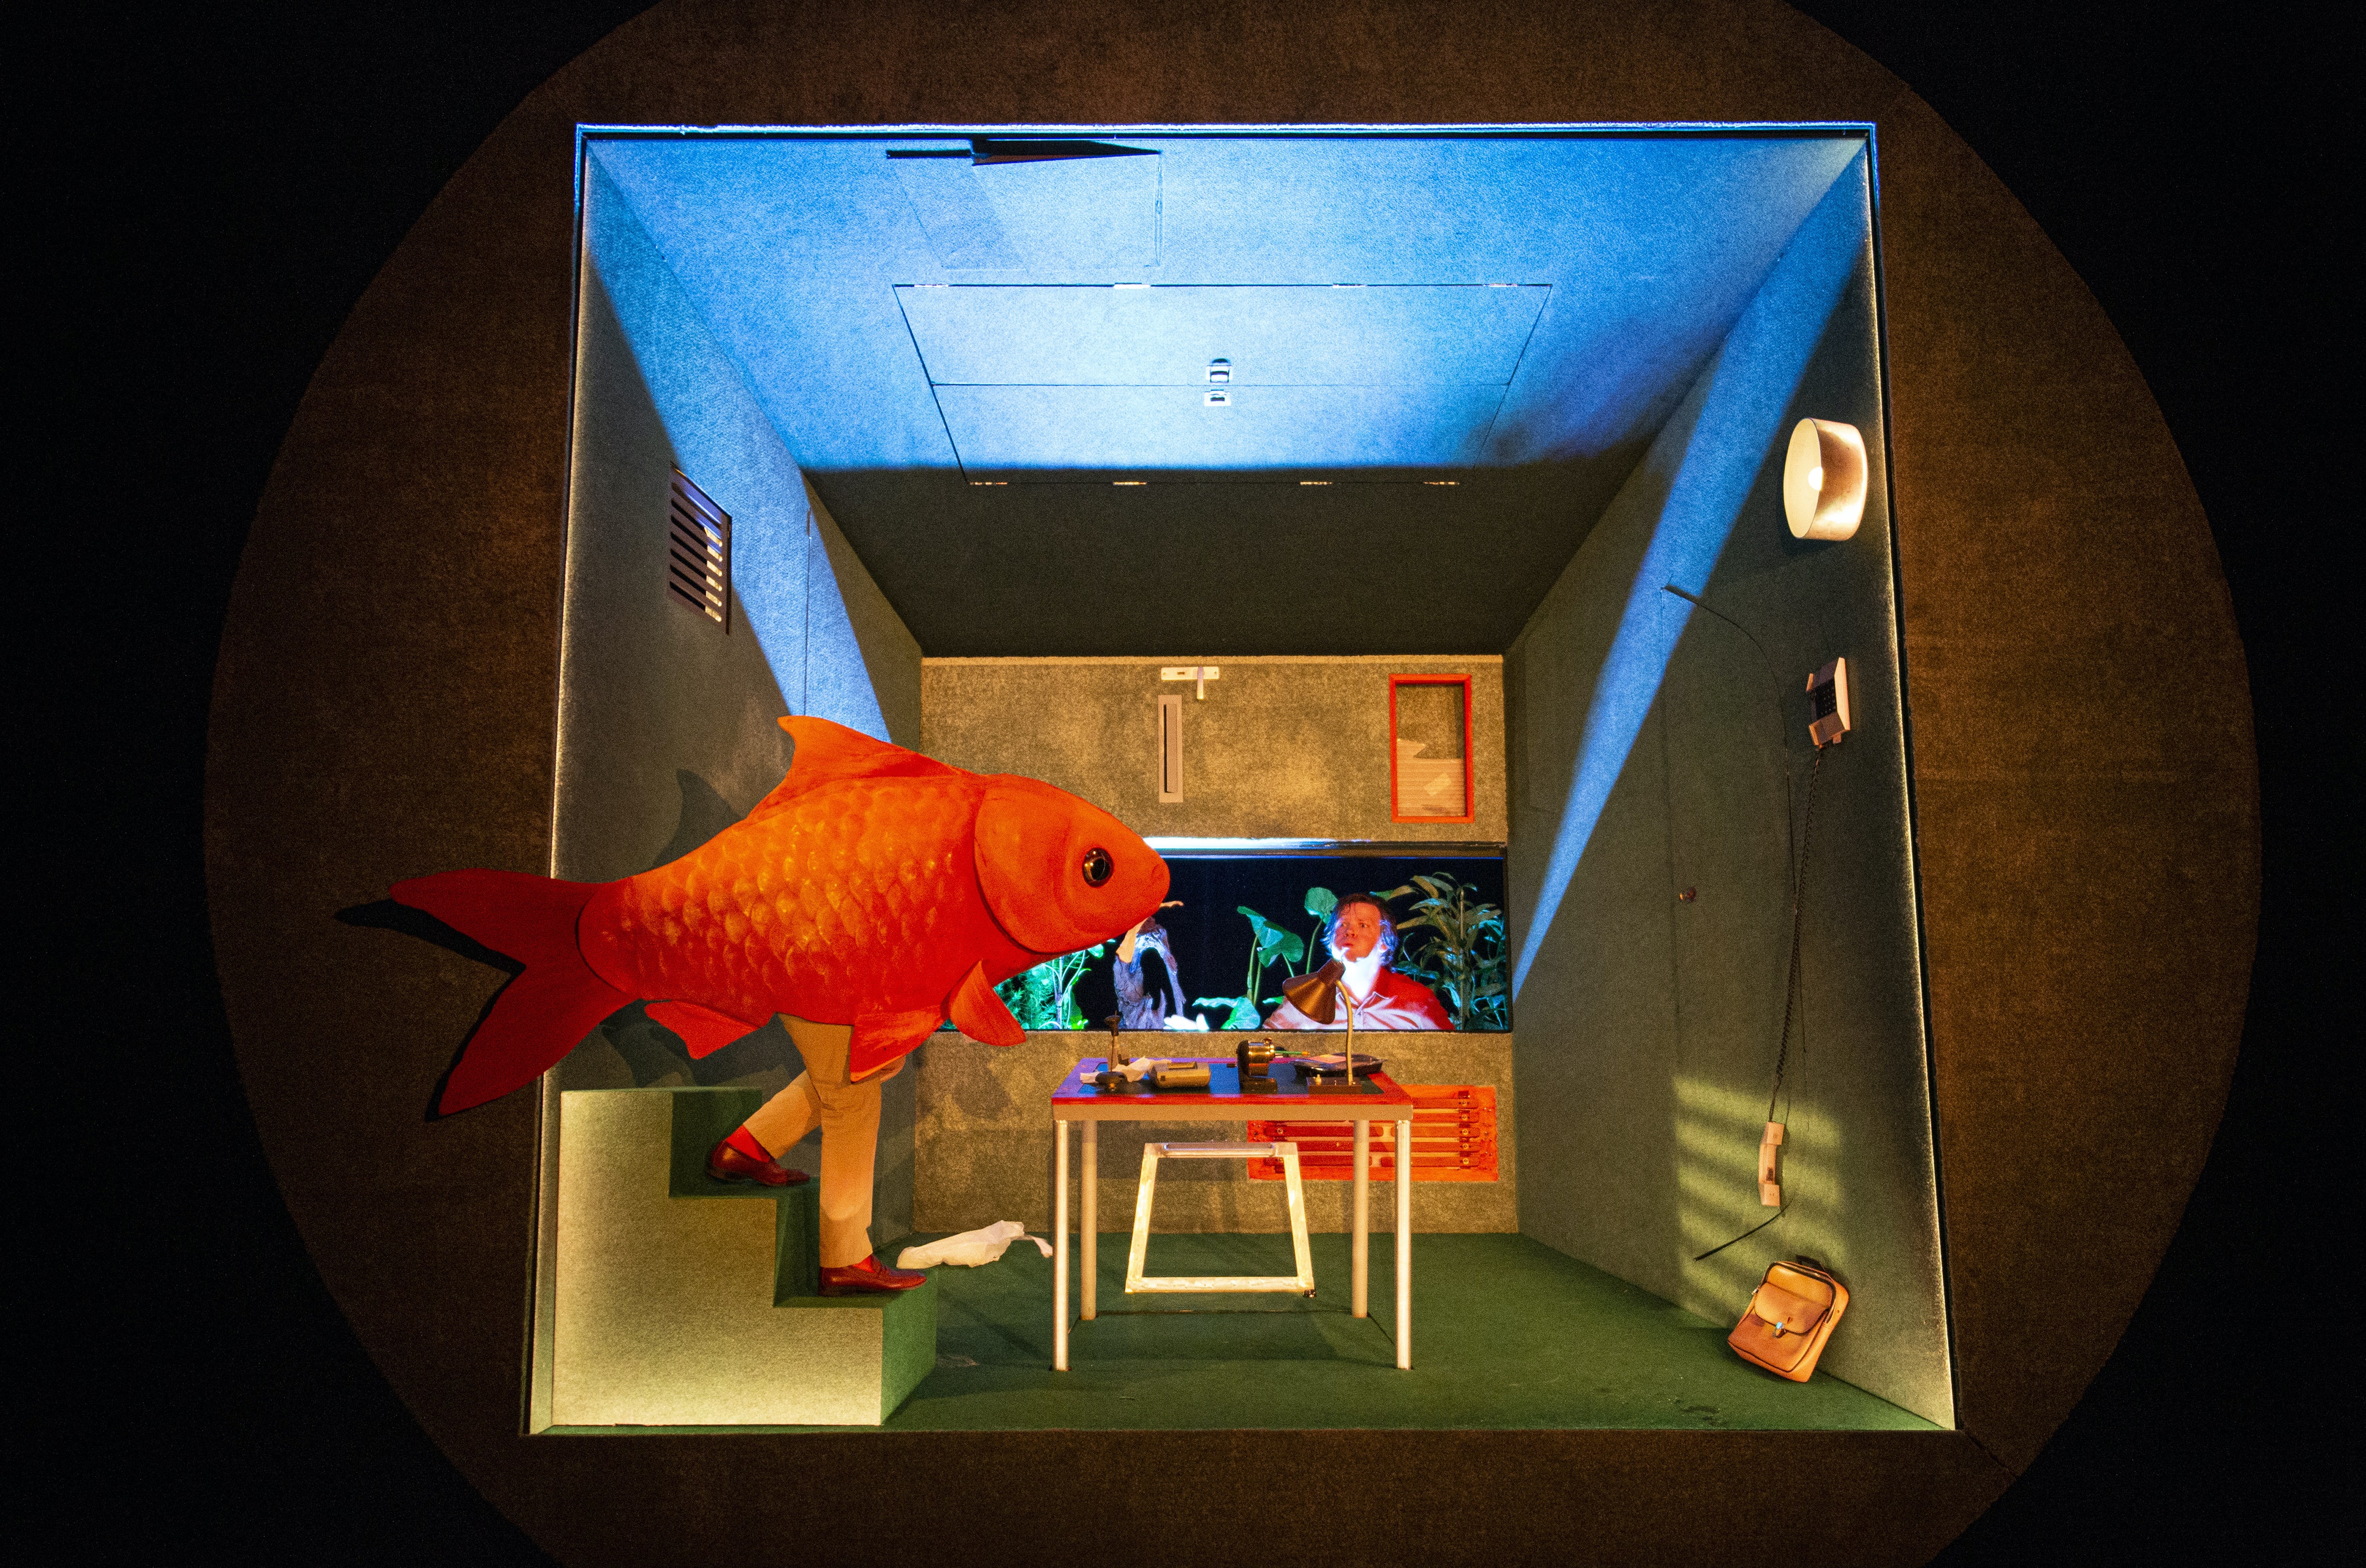 Colour photo. Inside the small house, a giant fish eats the bills that are on the table. The fish is observed by the performer, amazed, trapped inside an aquarium.